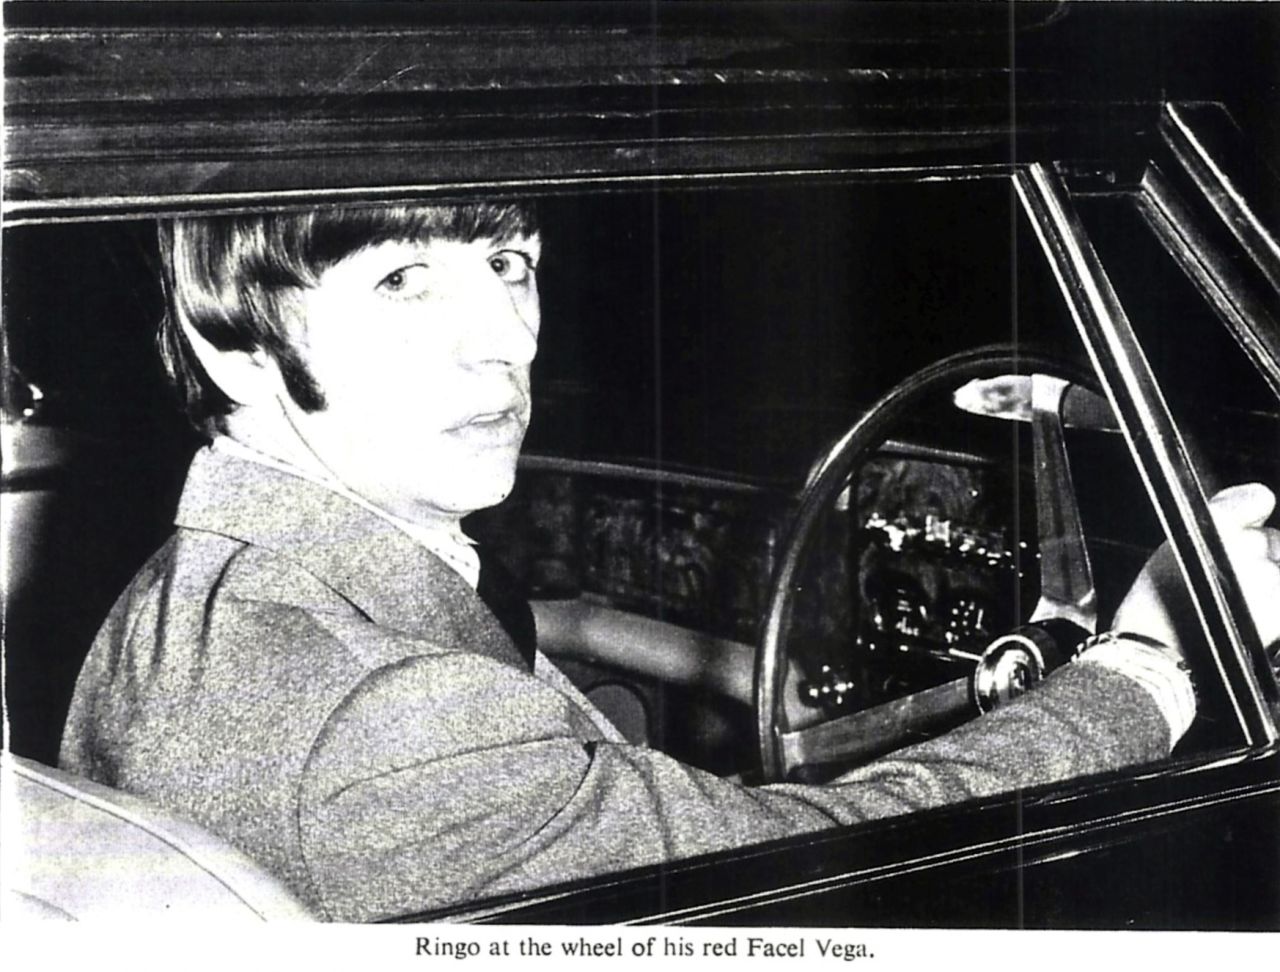 Other famous owners of the car include Joan Collins, Pablo Picasso and Frank Sinatra. "The fact that a car was previously owned by a celebrity will more often than not push the value up, but of course it depends on who the celebrity is," says Bonham's spokesperson Chloe Ashby. 